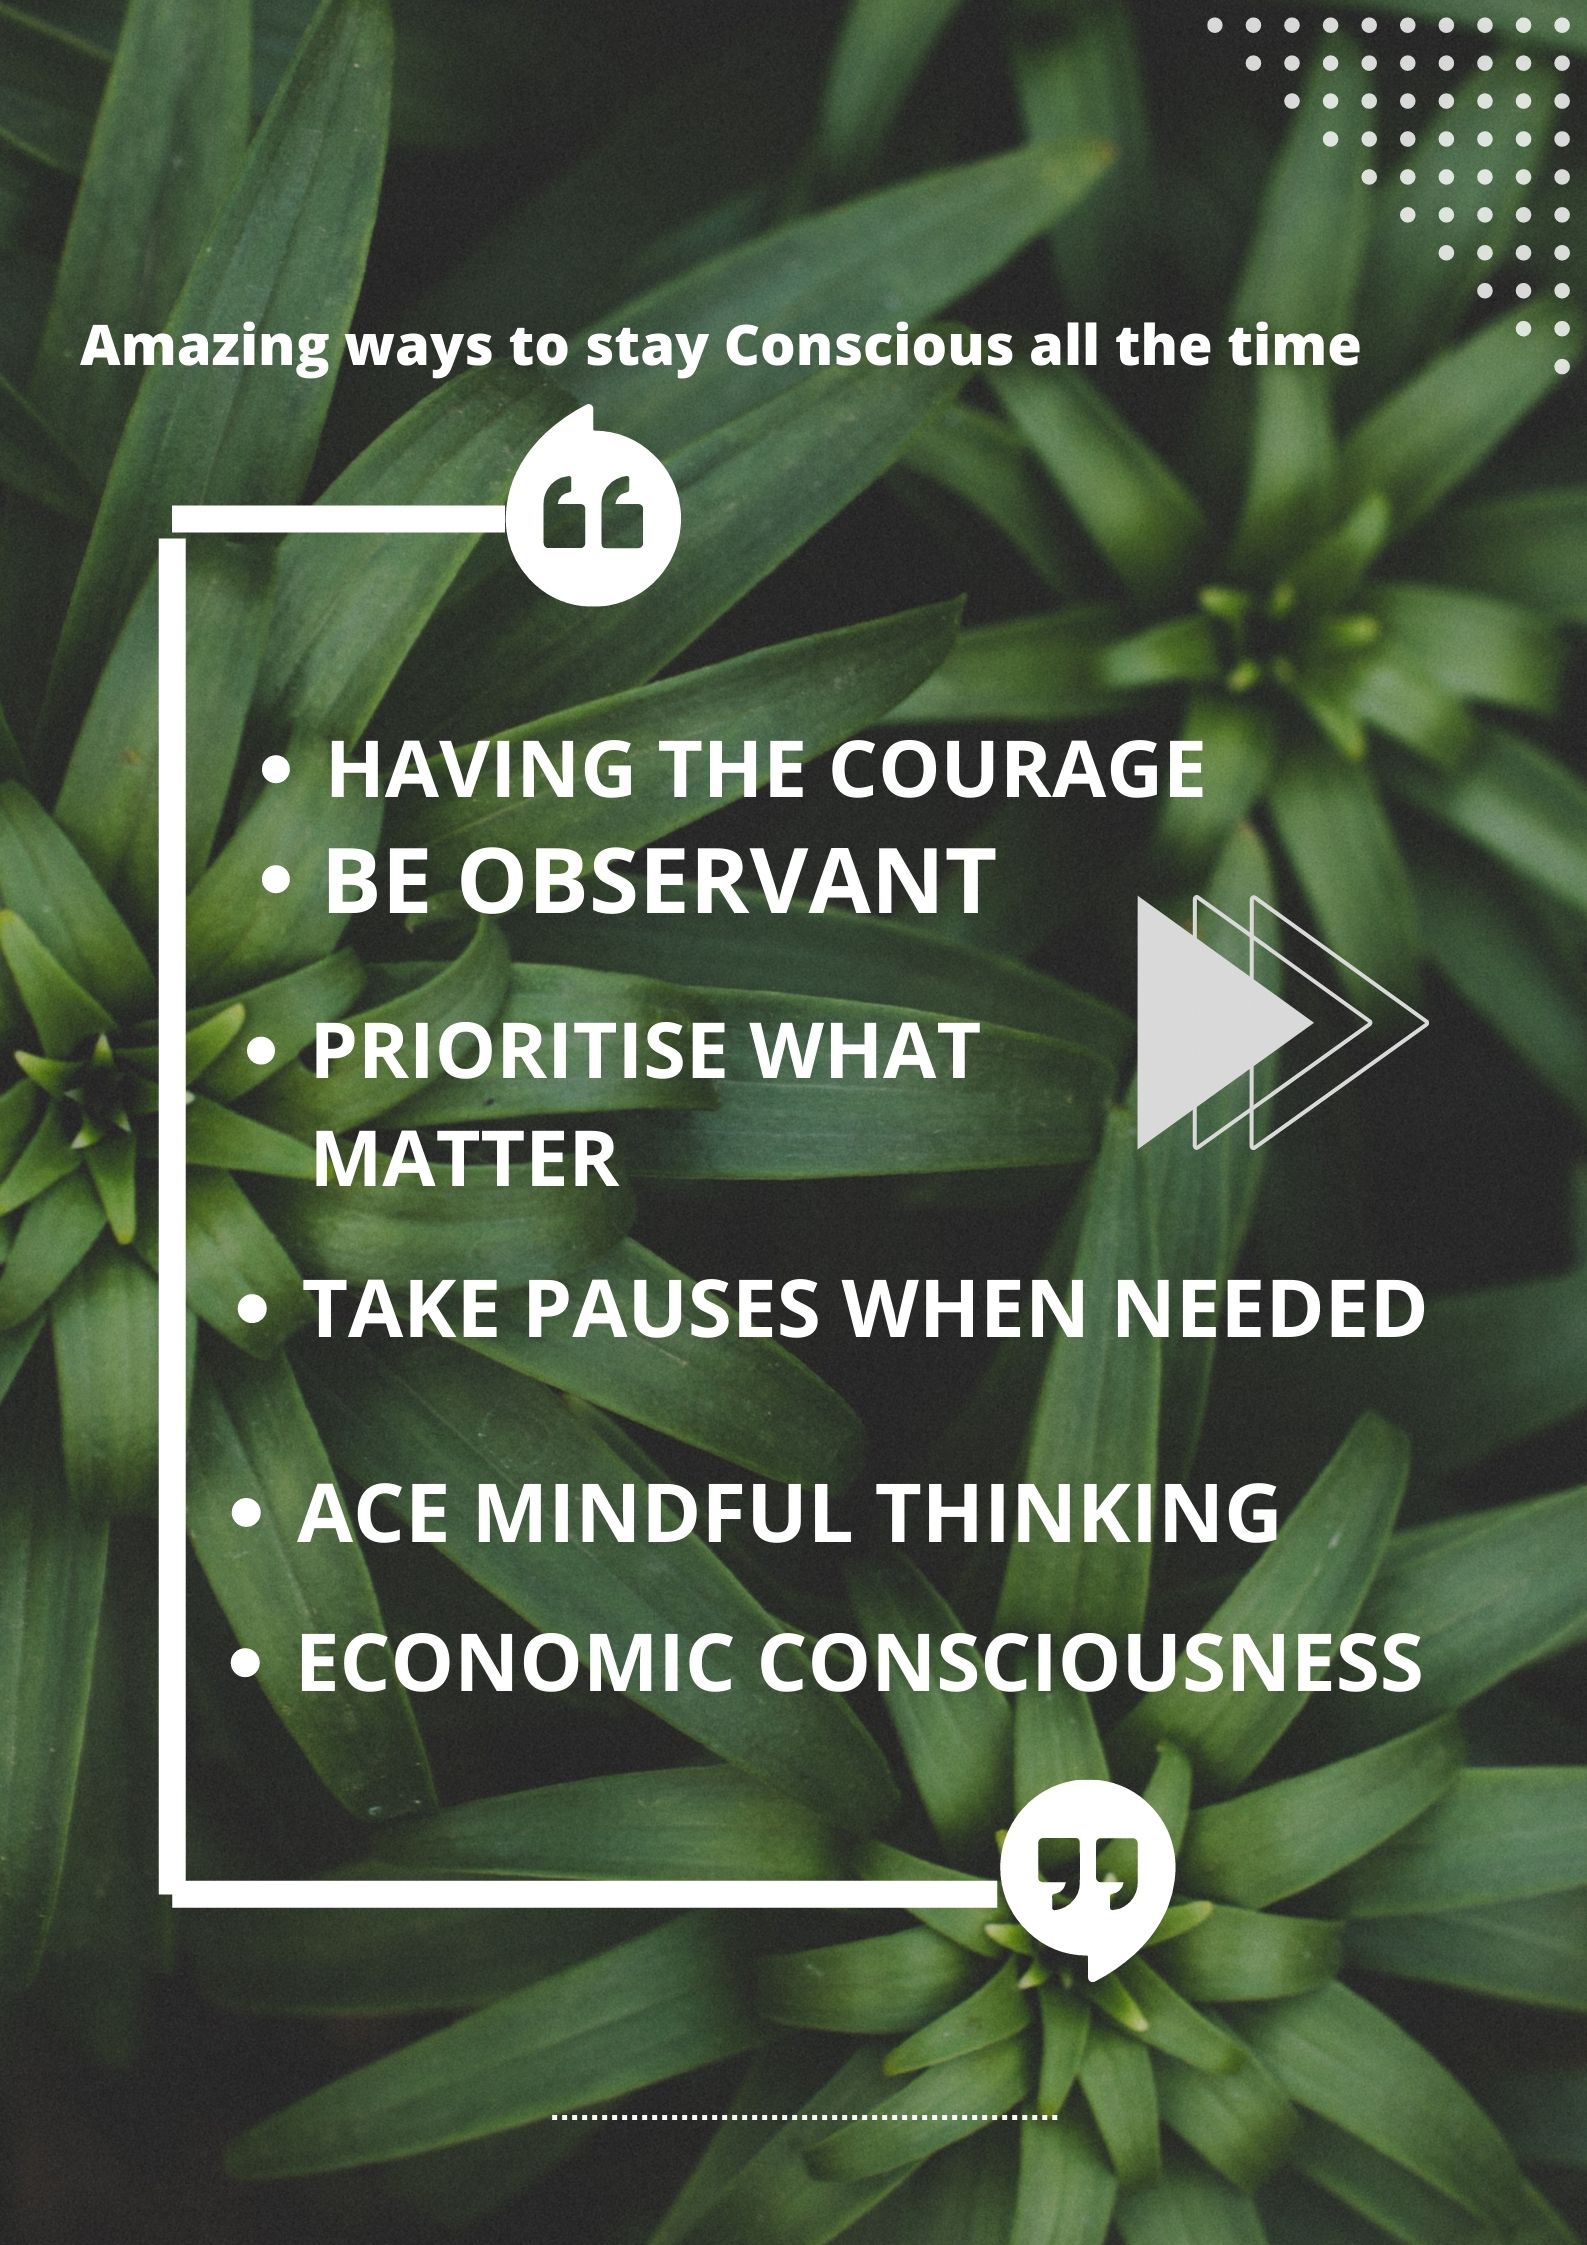 How to stay in conscious.